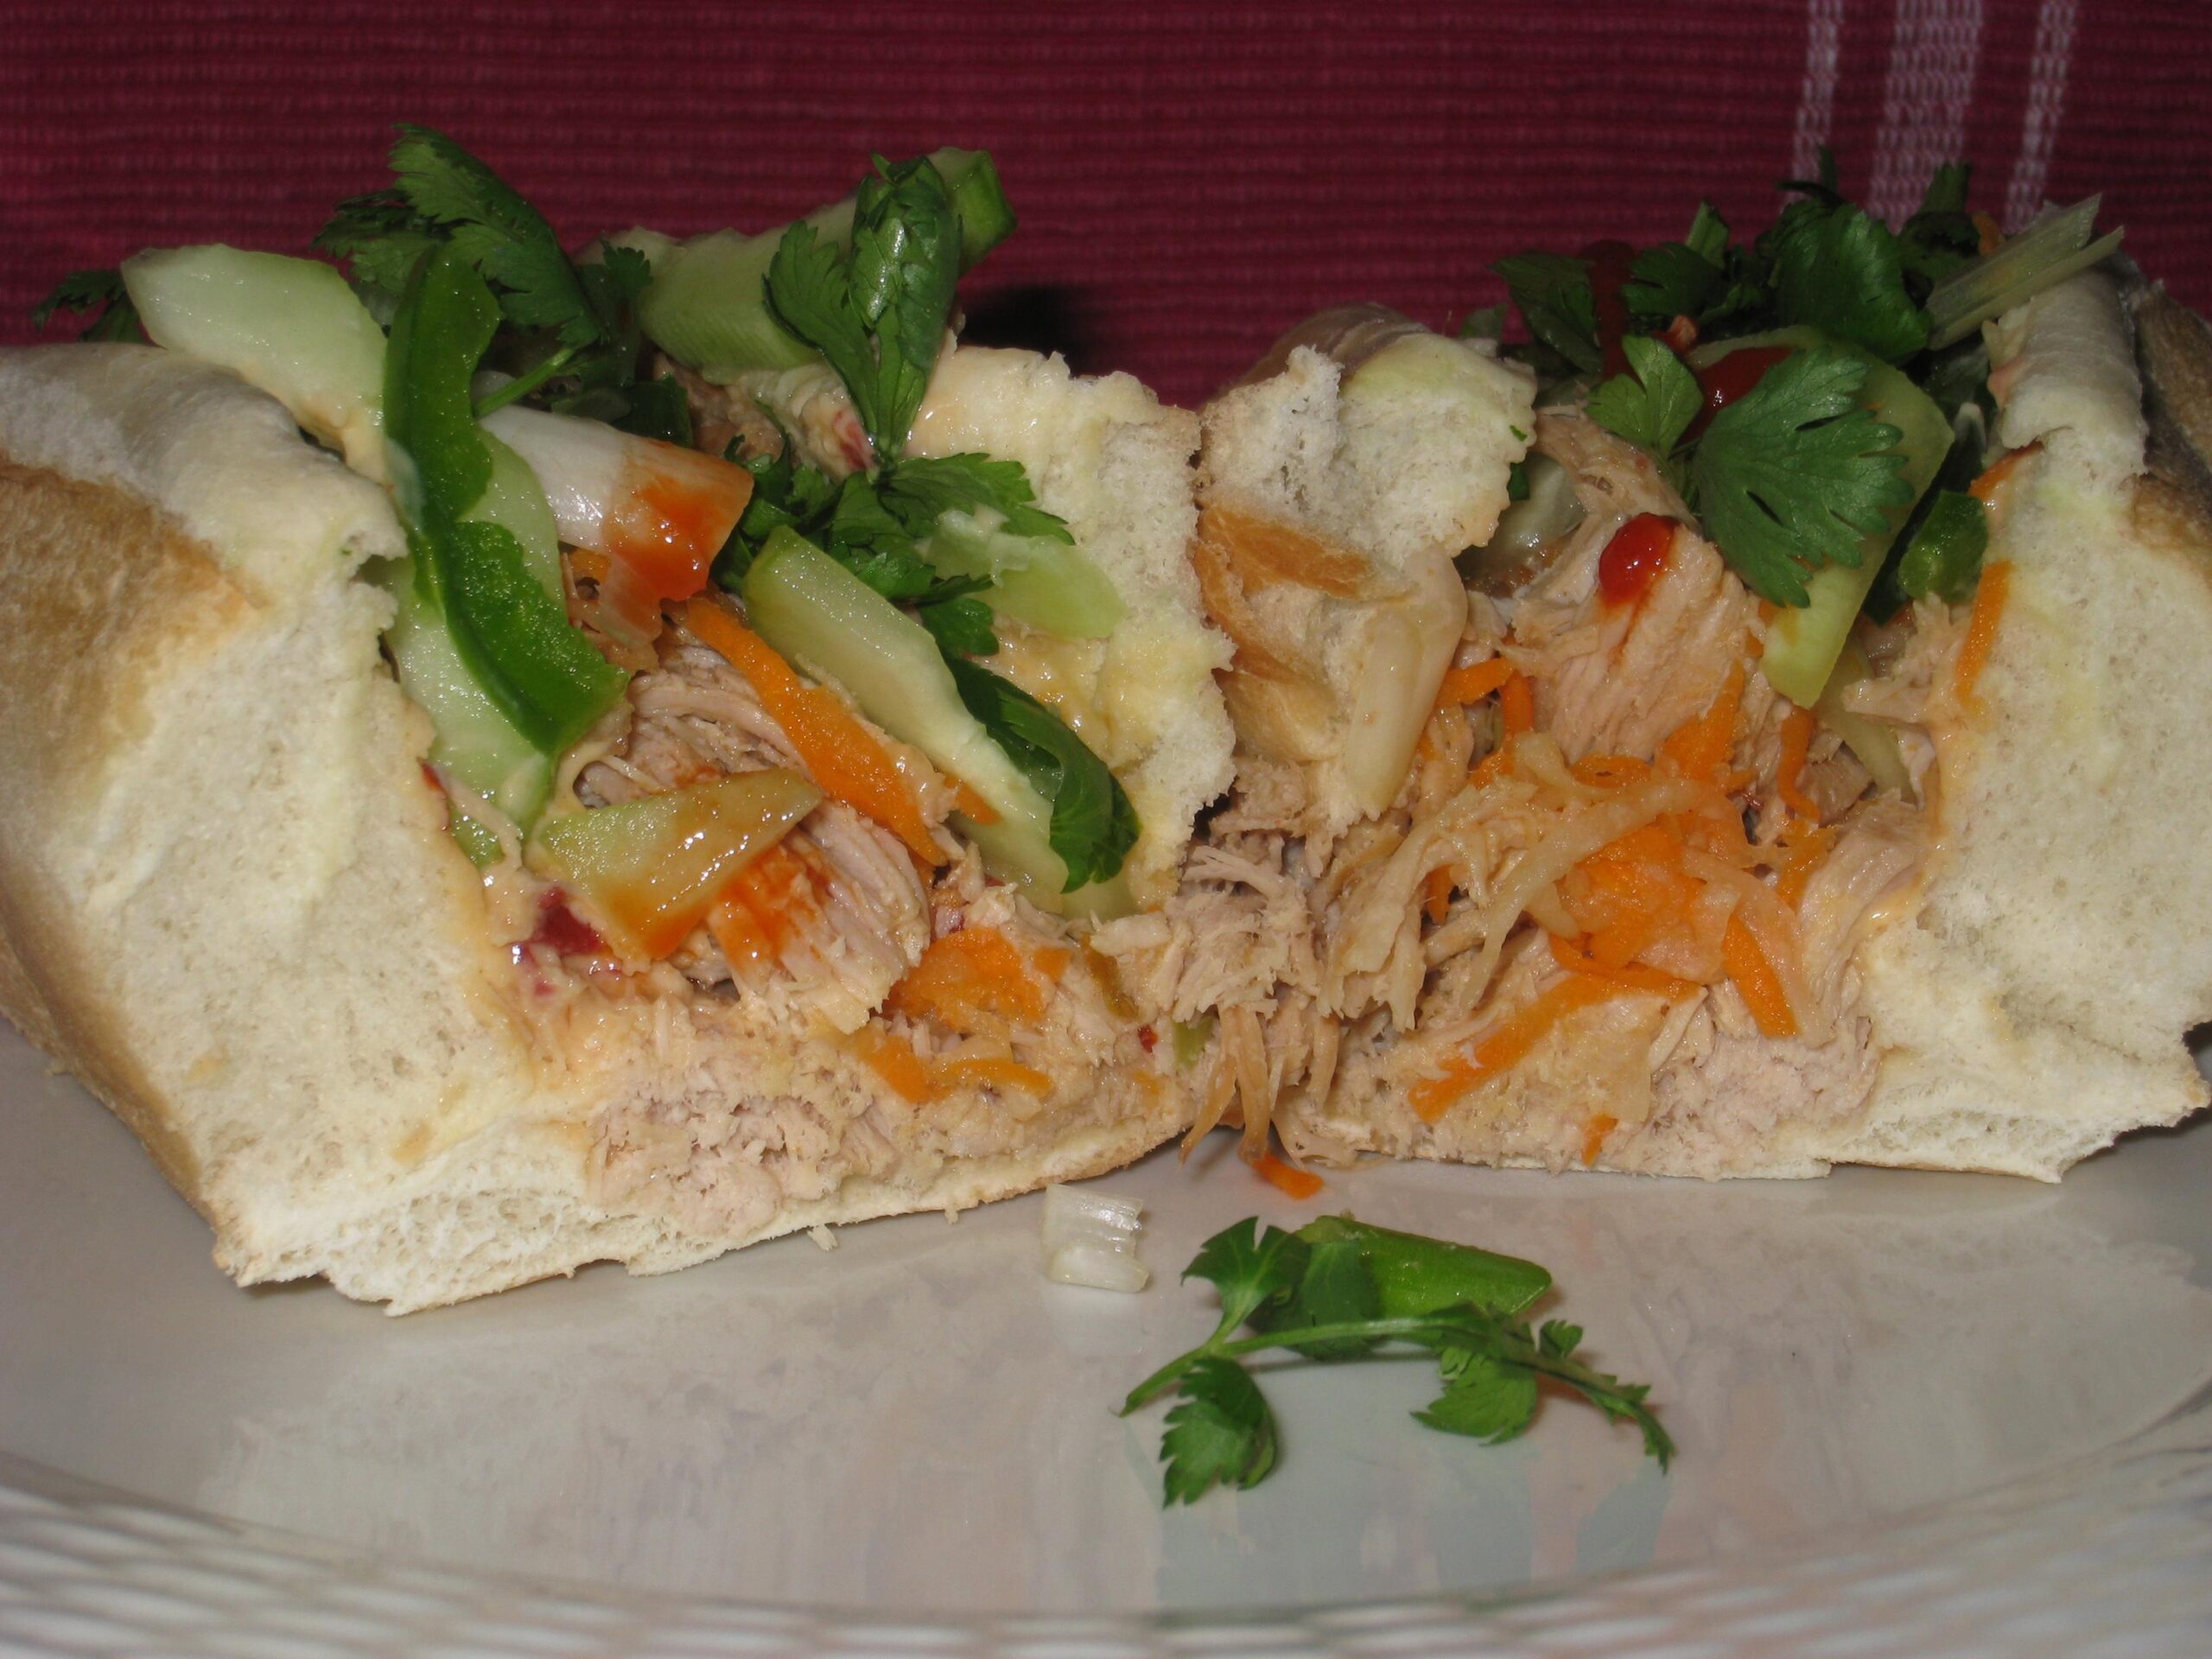 Delicious Banh Mi Recipe That Will Make Your Taste Buds Sing